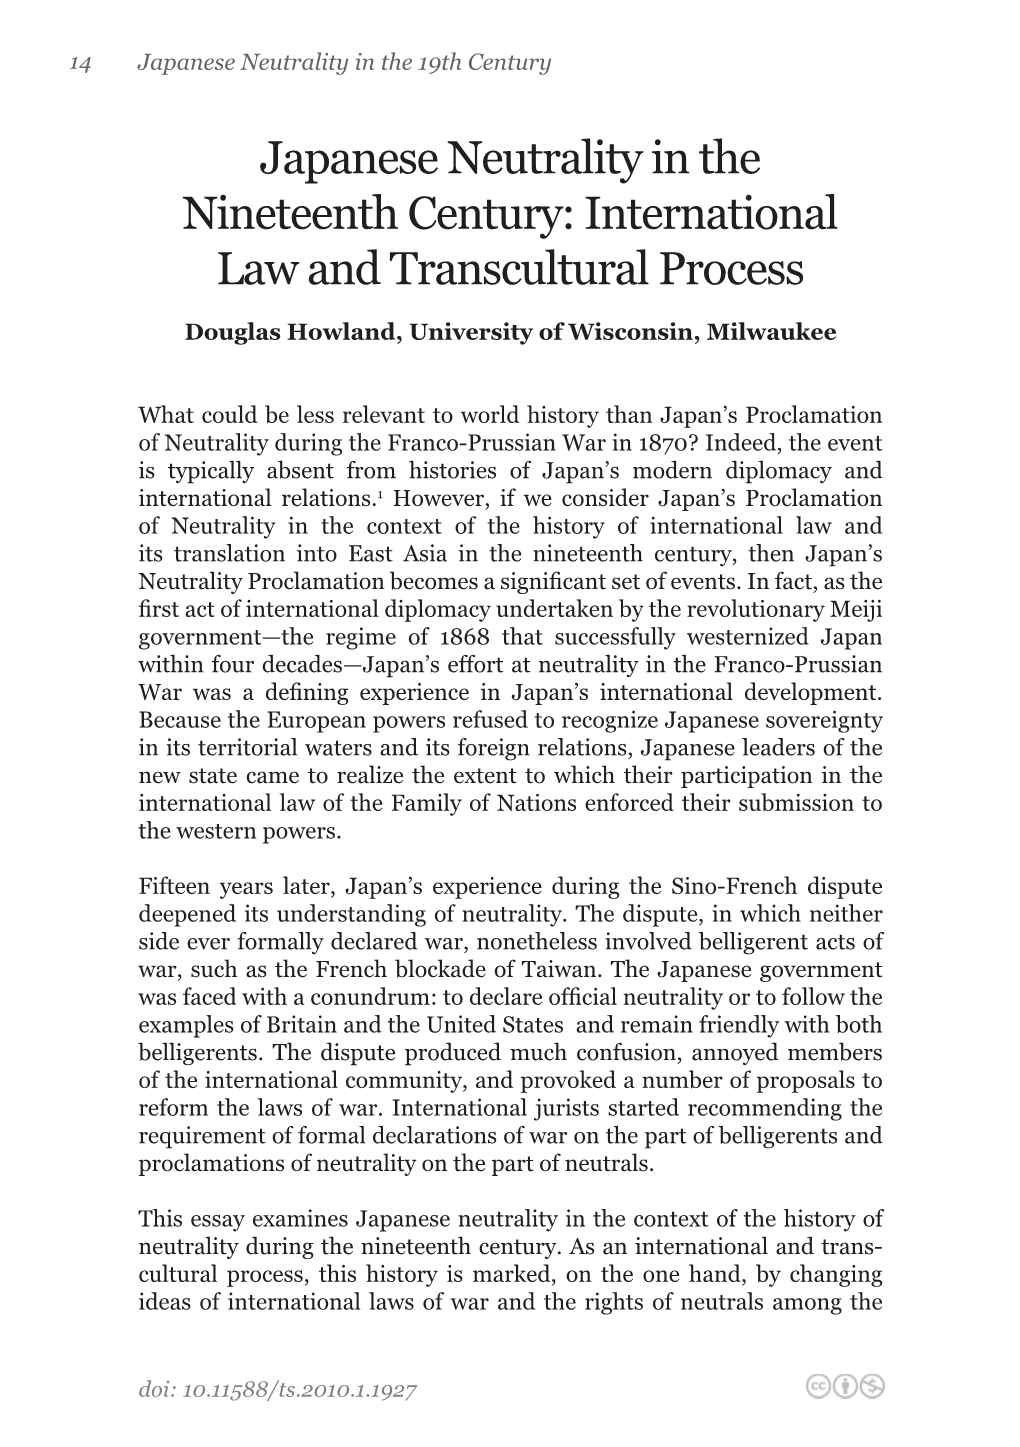 Japanese Neutrality in the Nineteenth Century: International Law and Transcultural Process